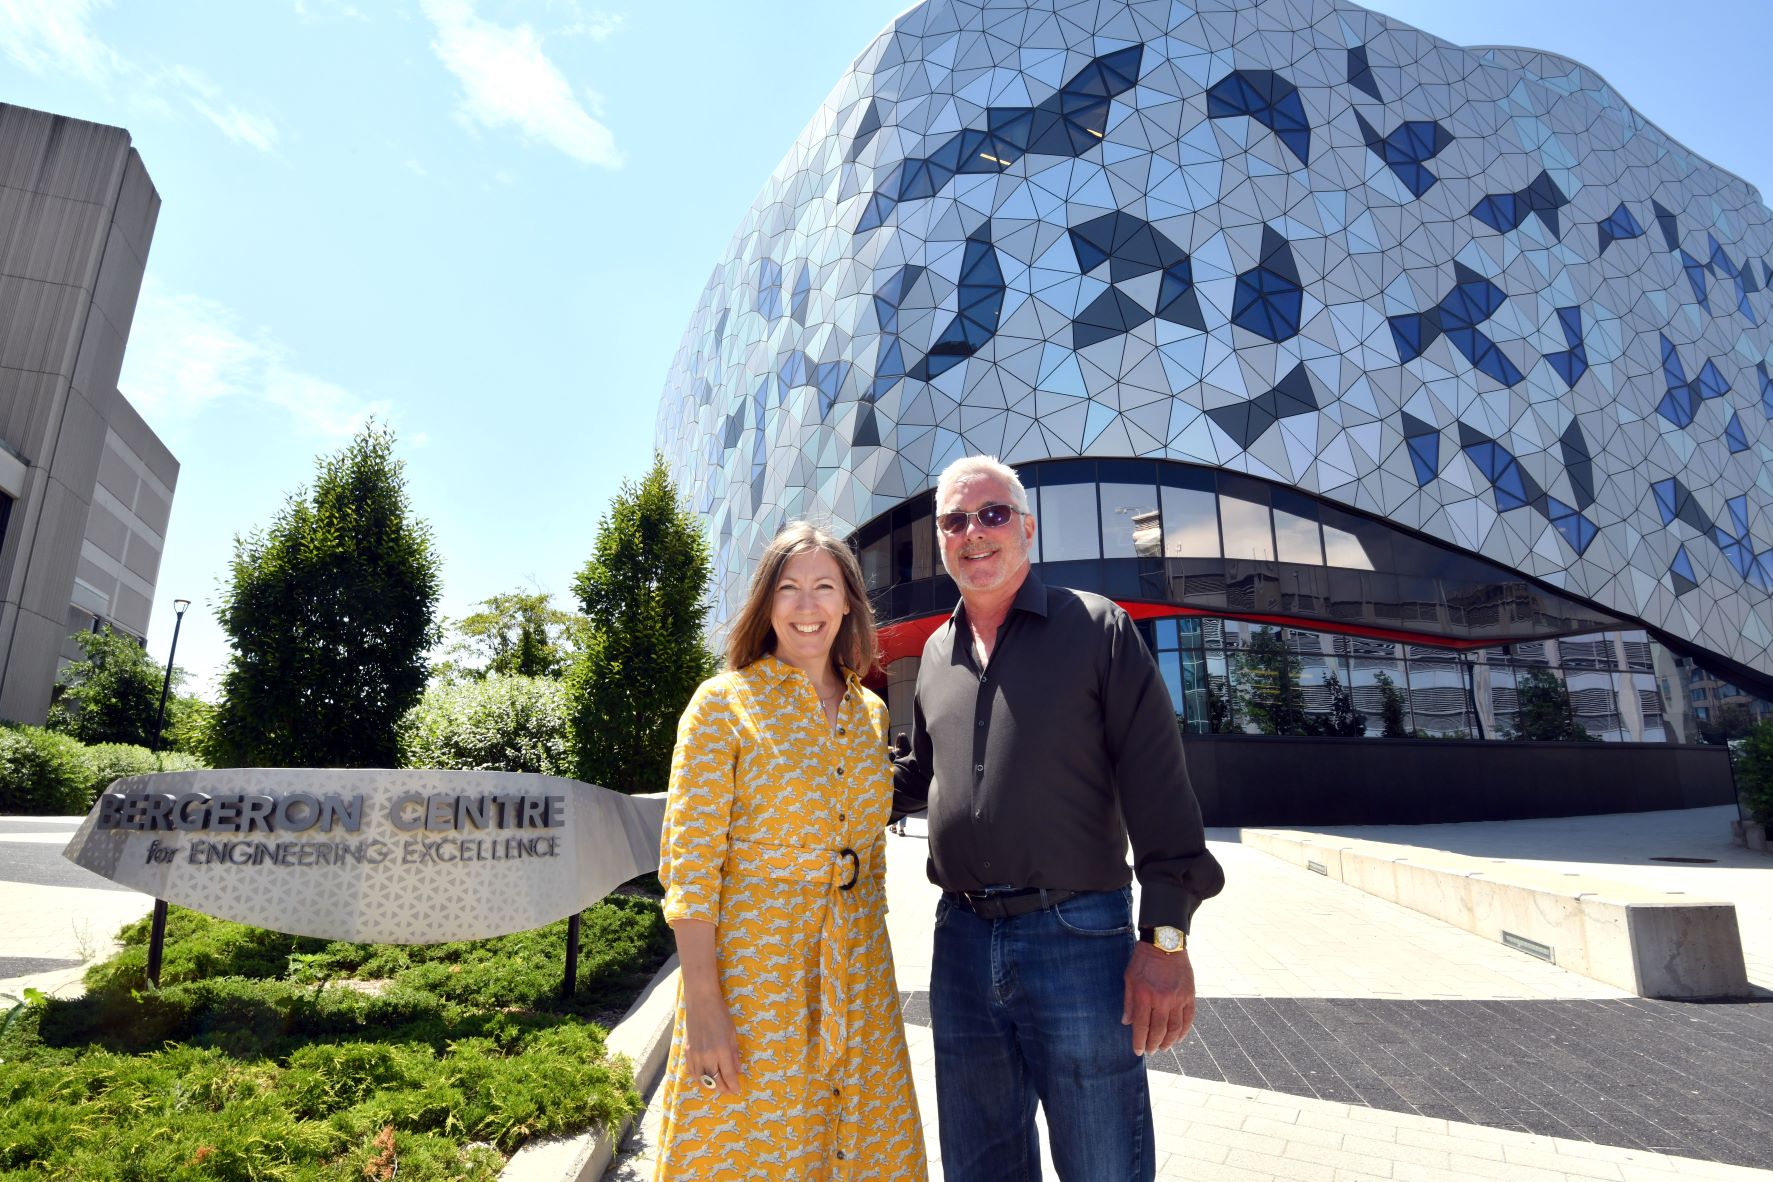 Doug Bergeron and Jane Goodyer outside of the Bergeron Centre